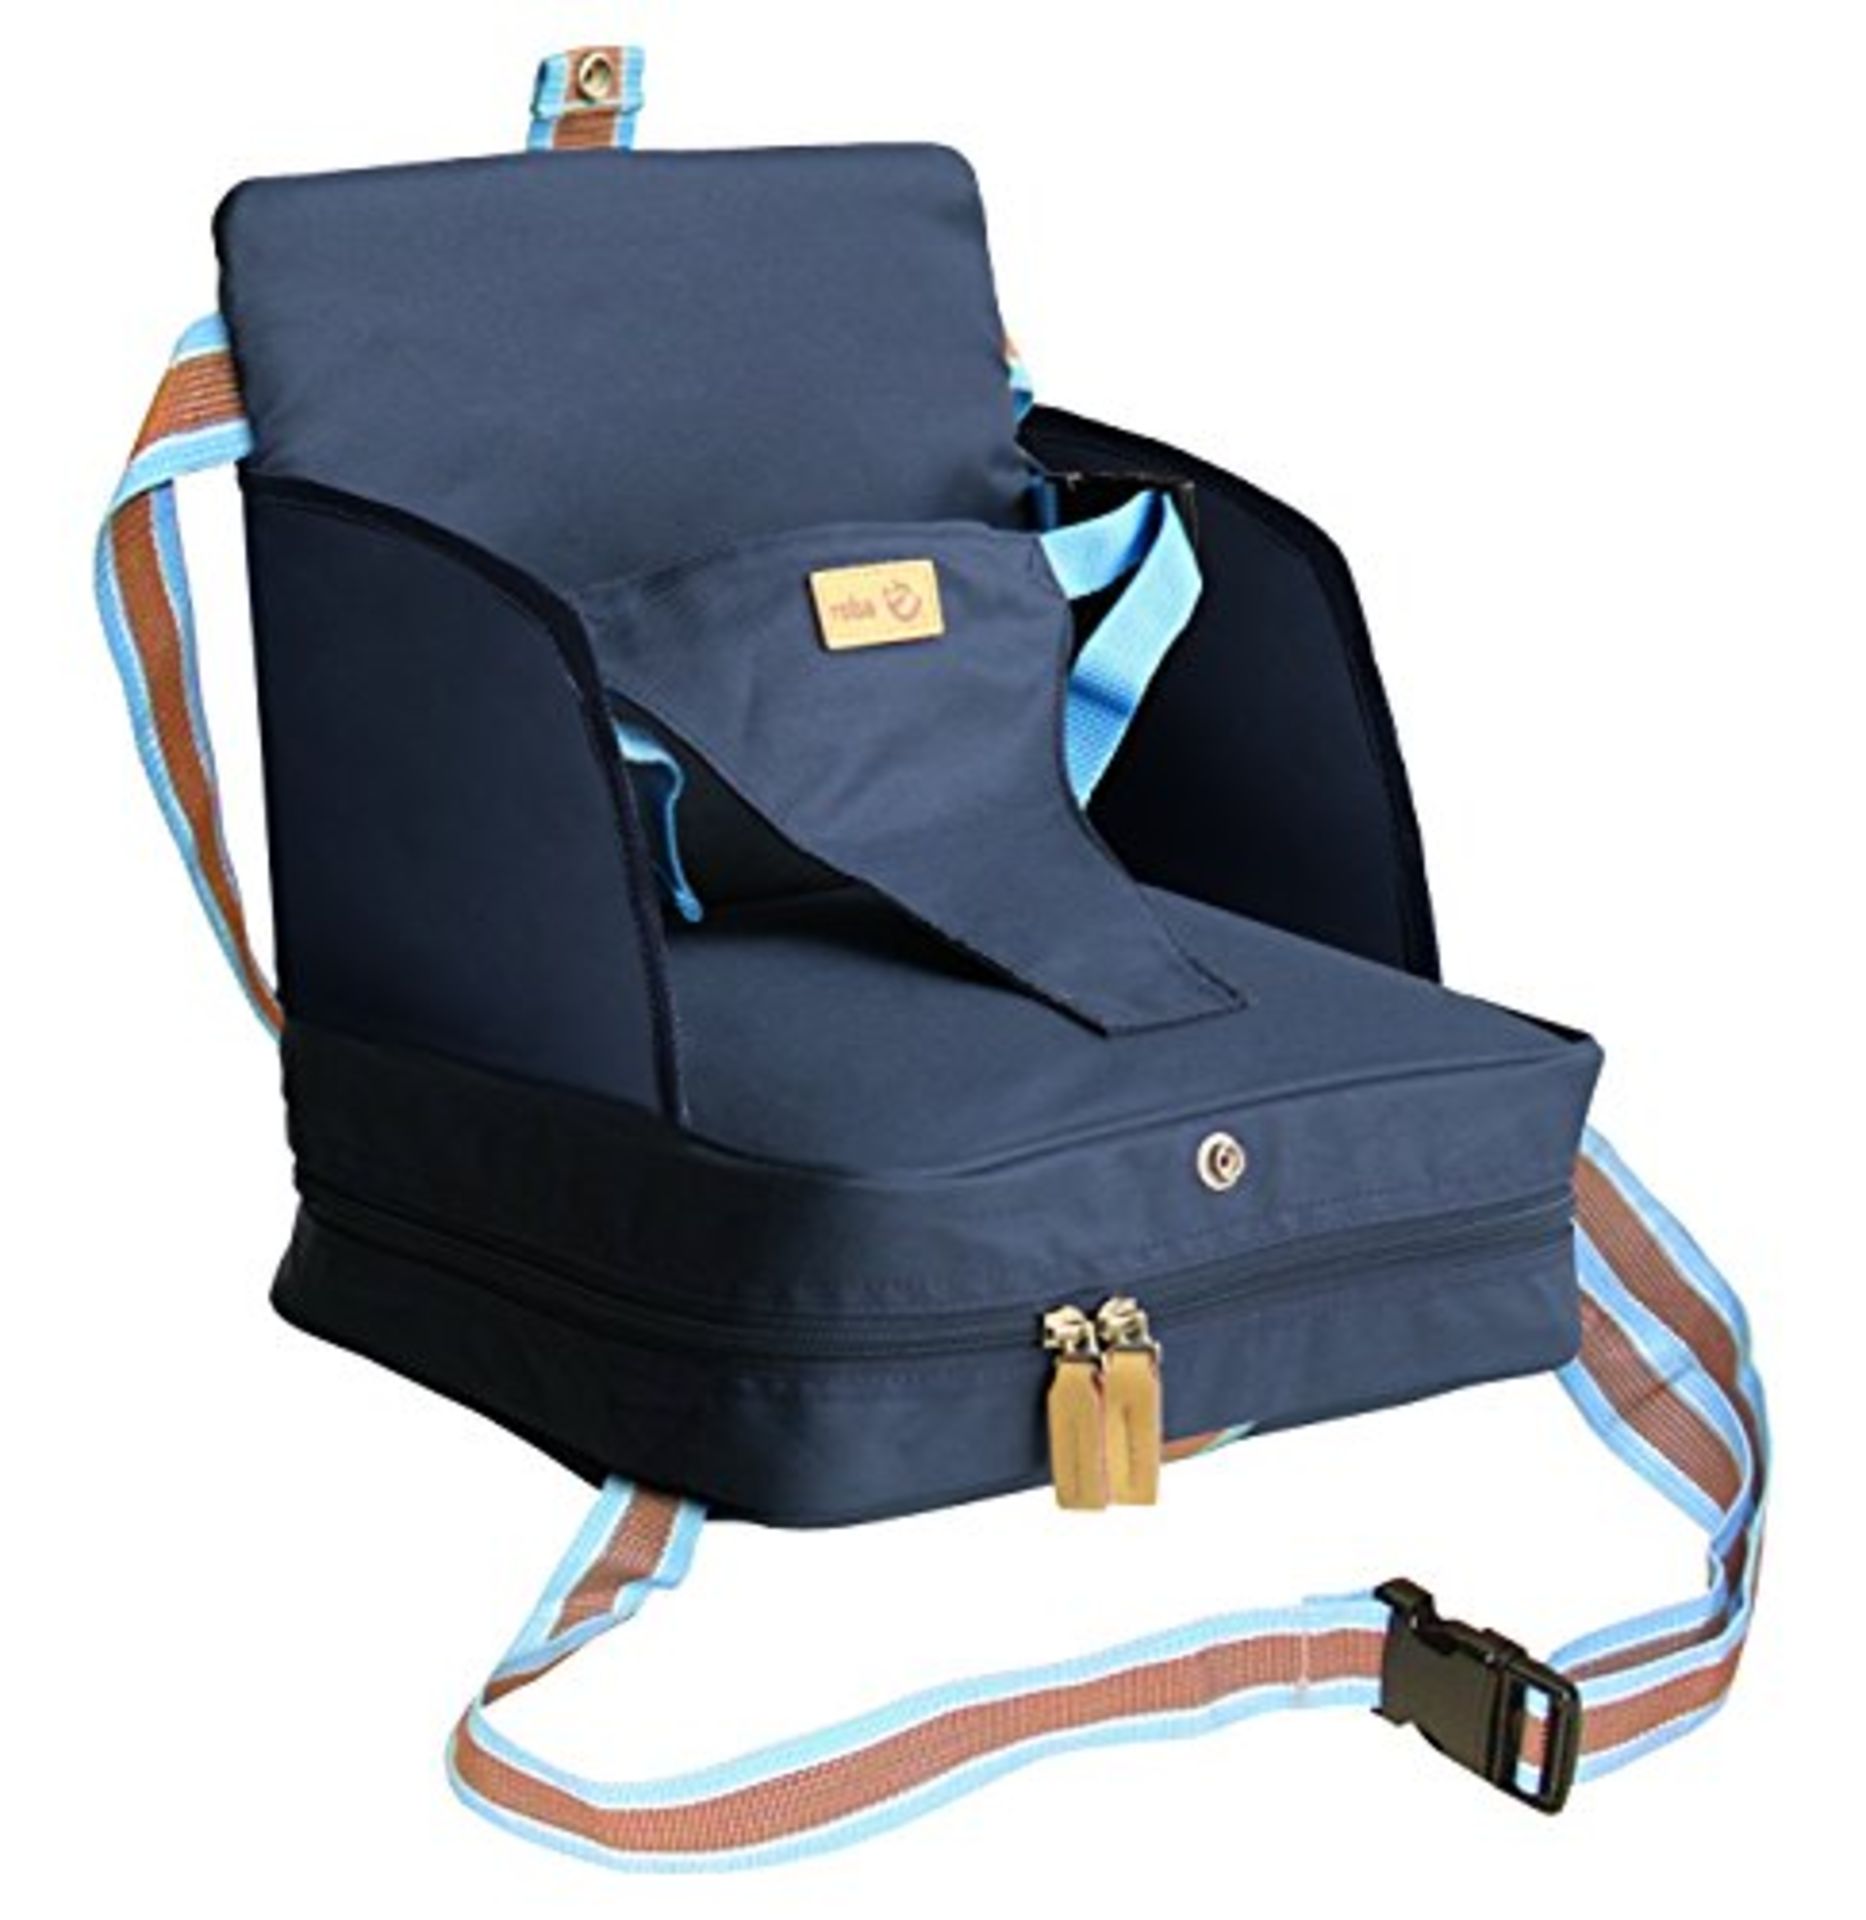 roba Booster Seat - Portable inflatable child seat with raised side panels - Flexible - Image 3 of 4